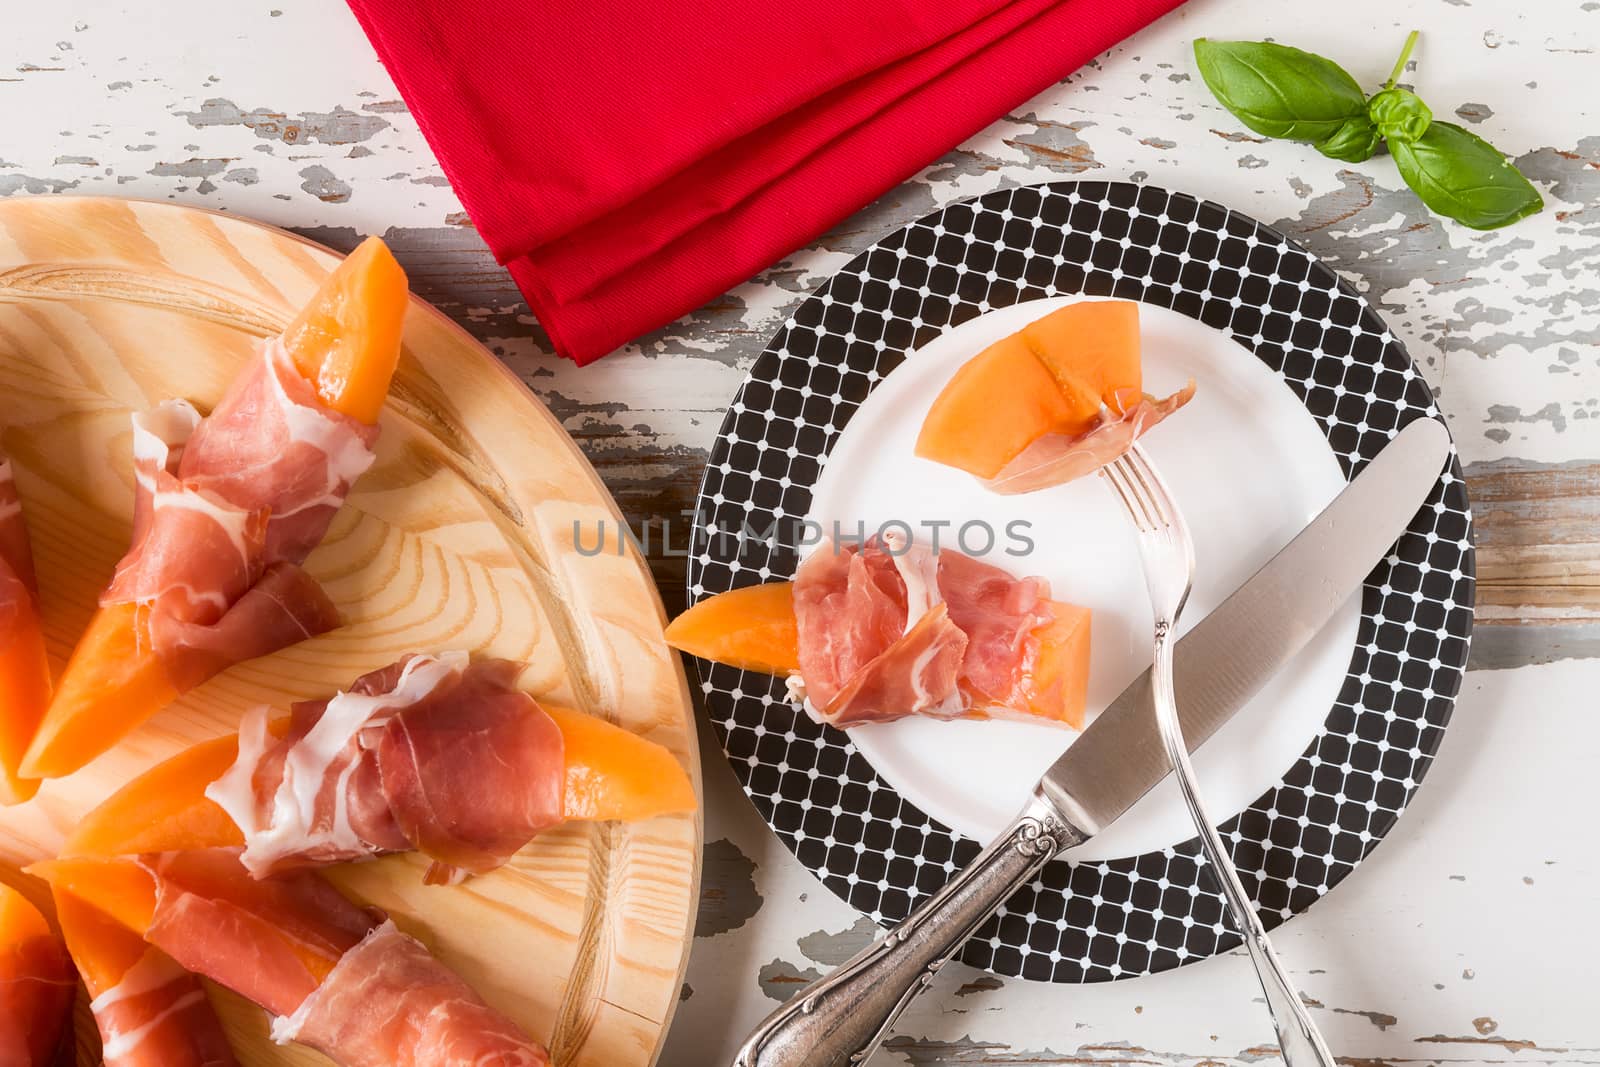 Italian prosciutto and melon on a plate seen from above